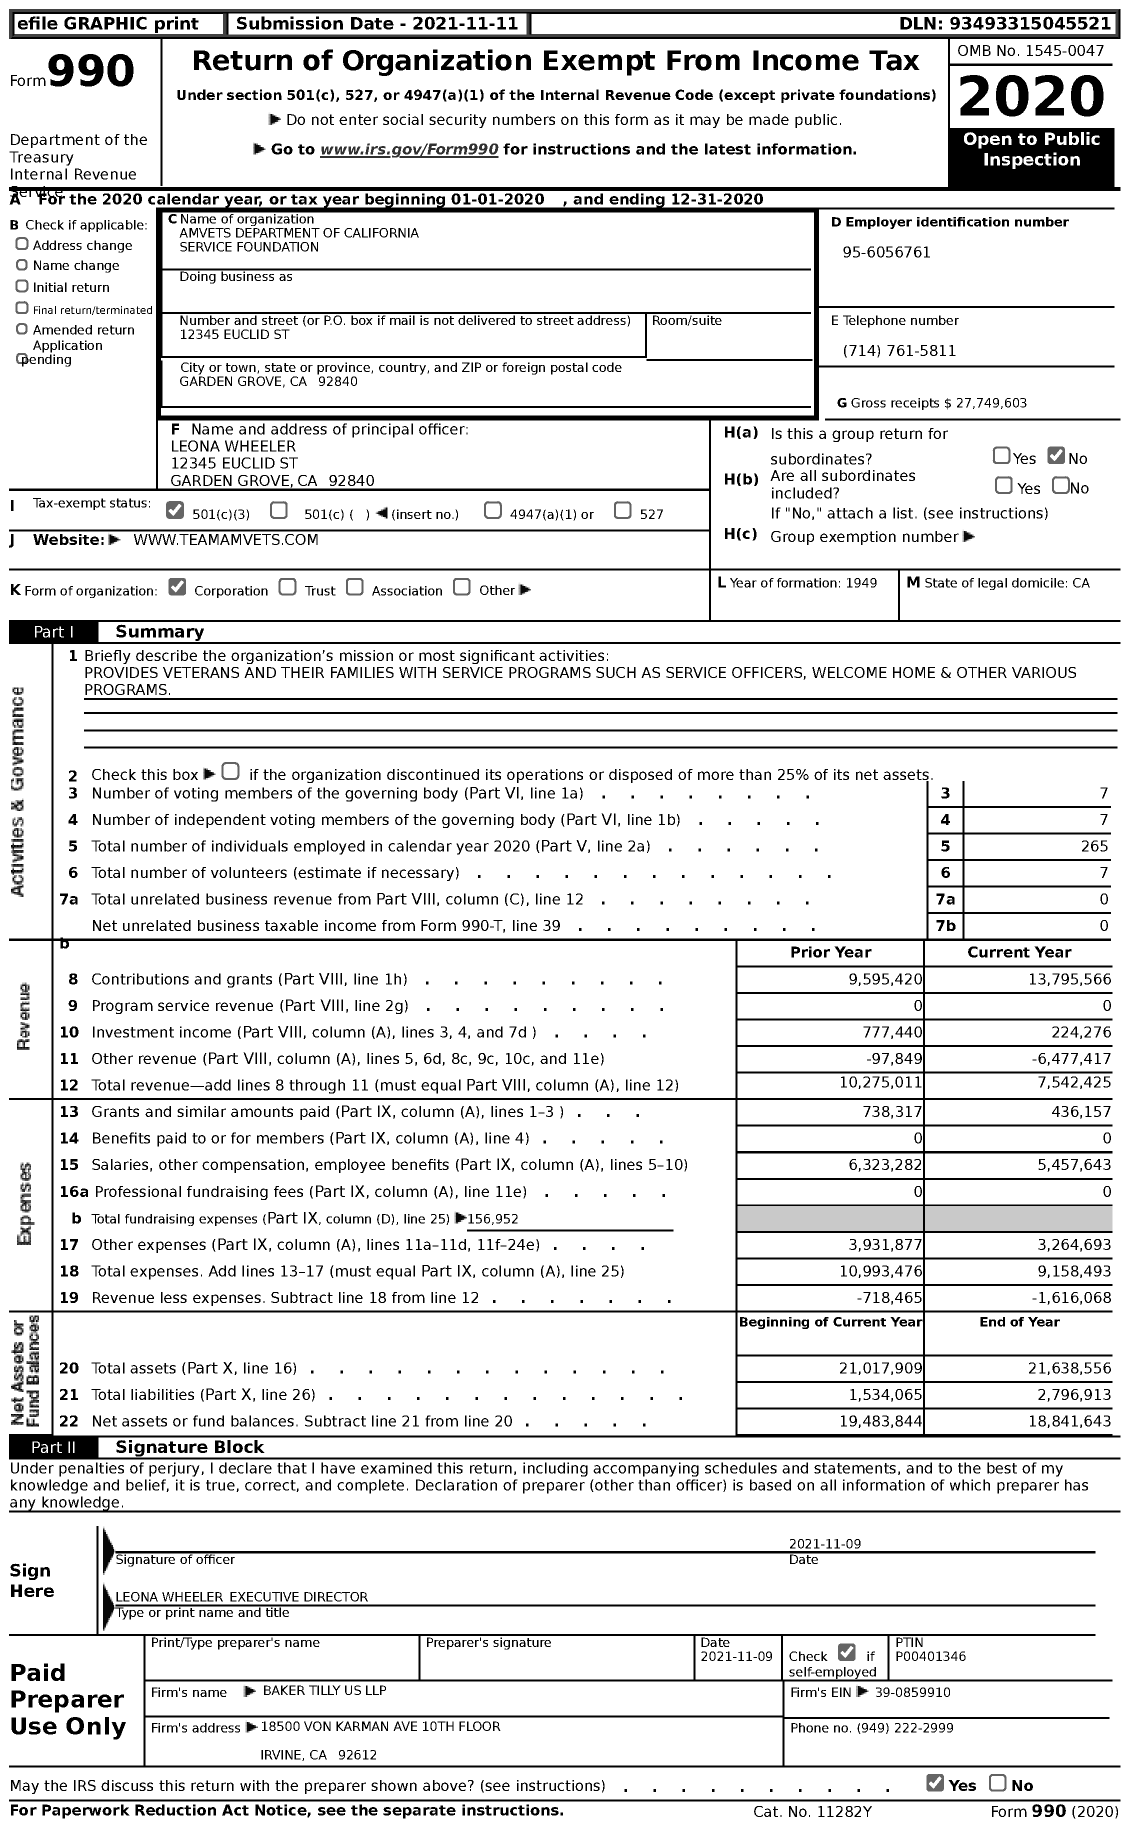 Image of first page of 2020 Form 990 for Amvets Department of California Service Foundation